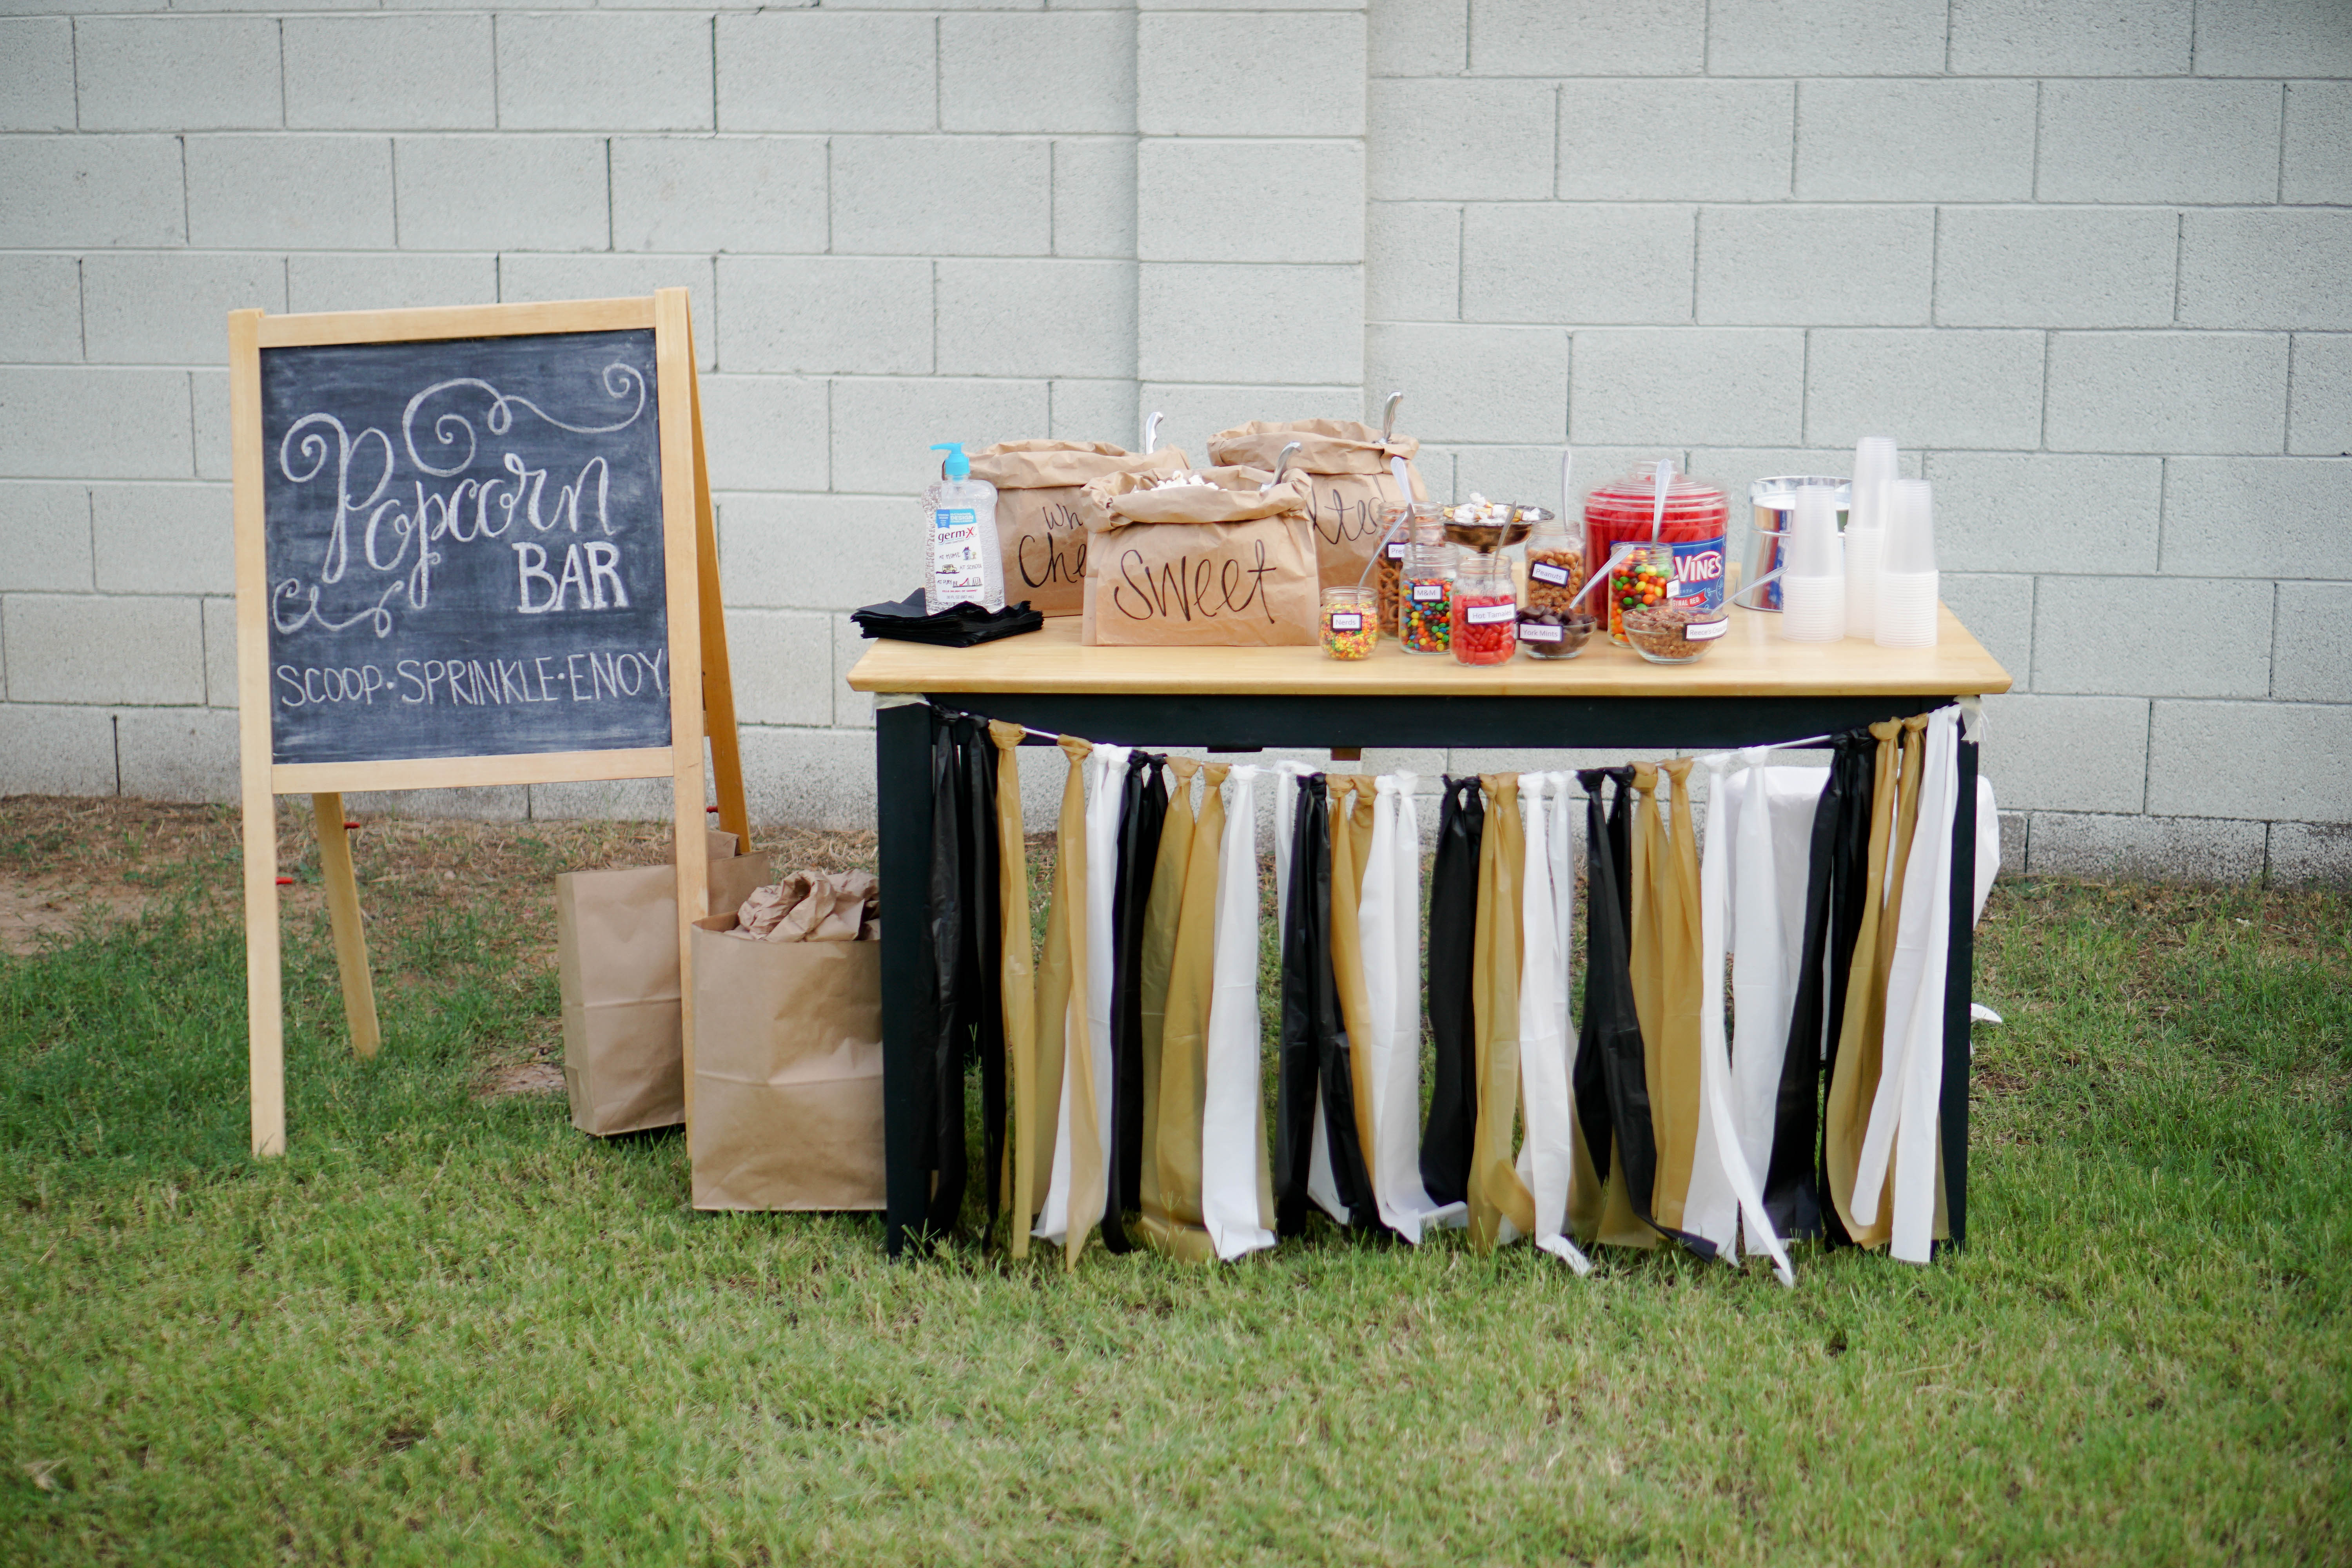 joining the Sherman Army Party Popcorn Bar
